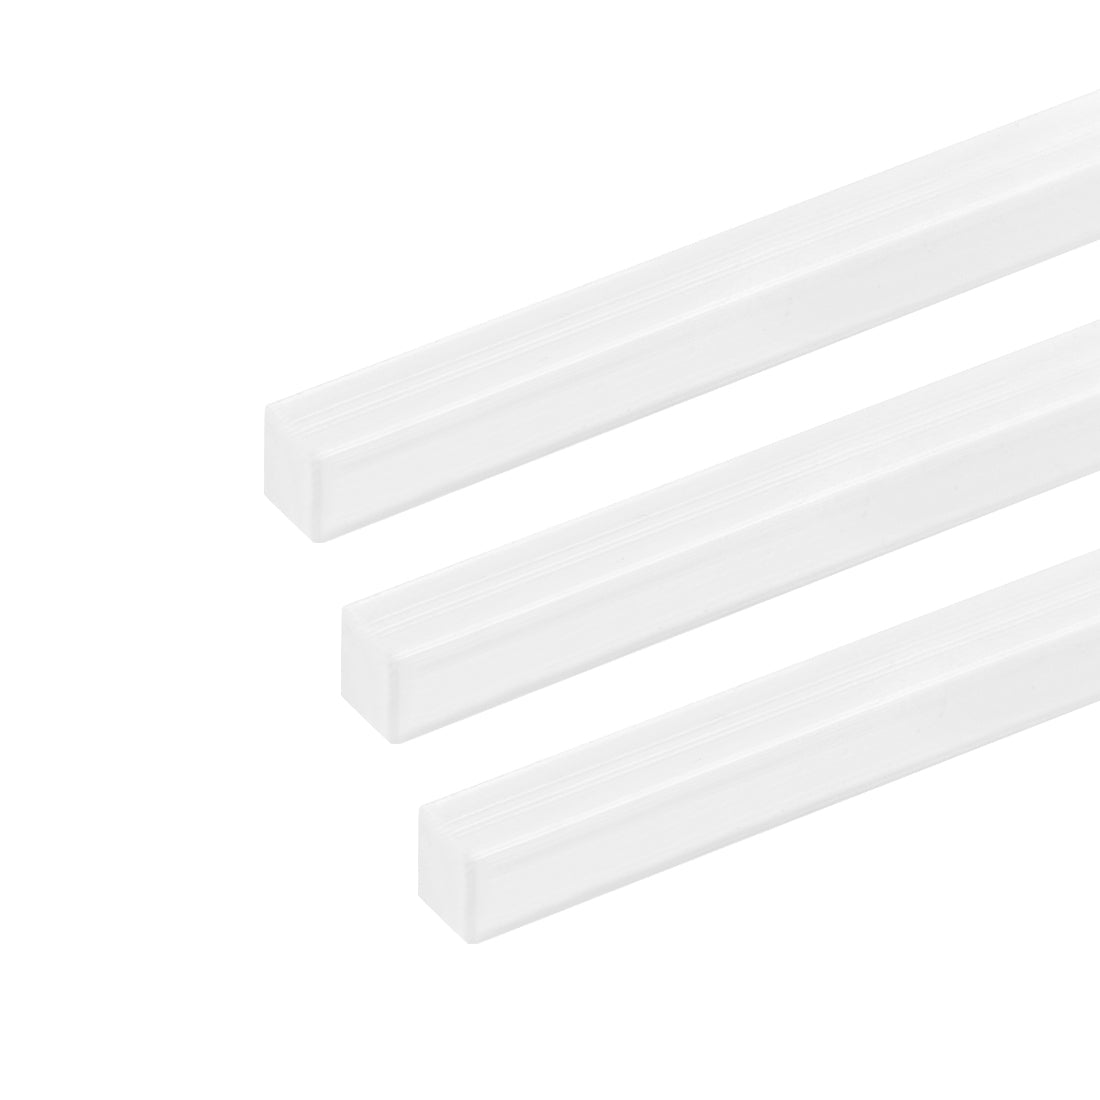 uxcell Uxcell 6mm × 6mm × 20" ABS Plastic Square Bar Rod for Architectural Model Making 3pcs